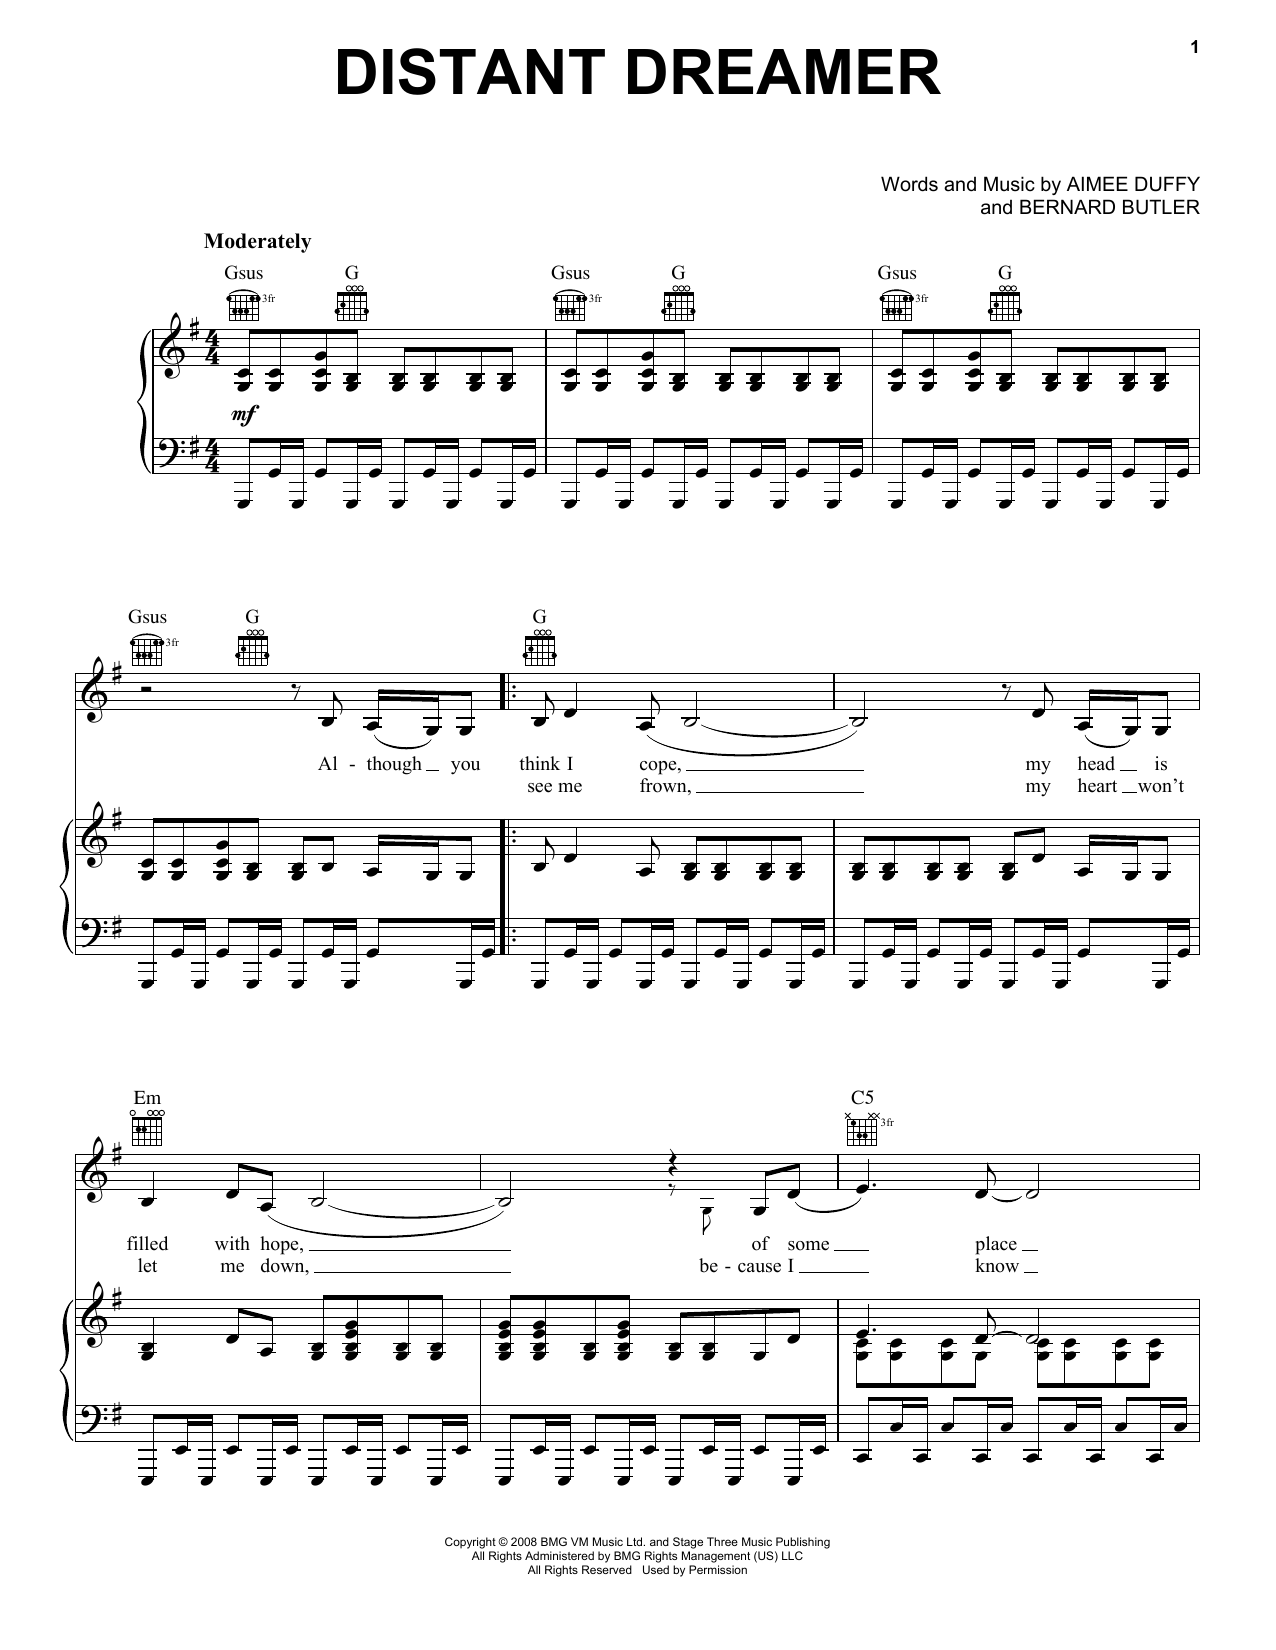 Download Duffy Distant Dreamer Sheet Music